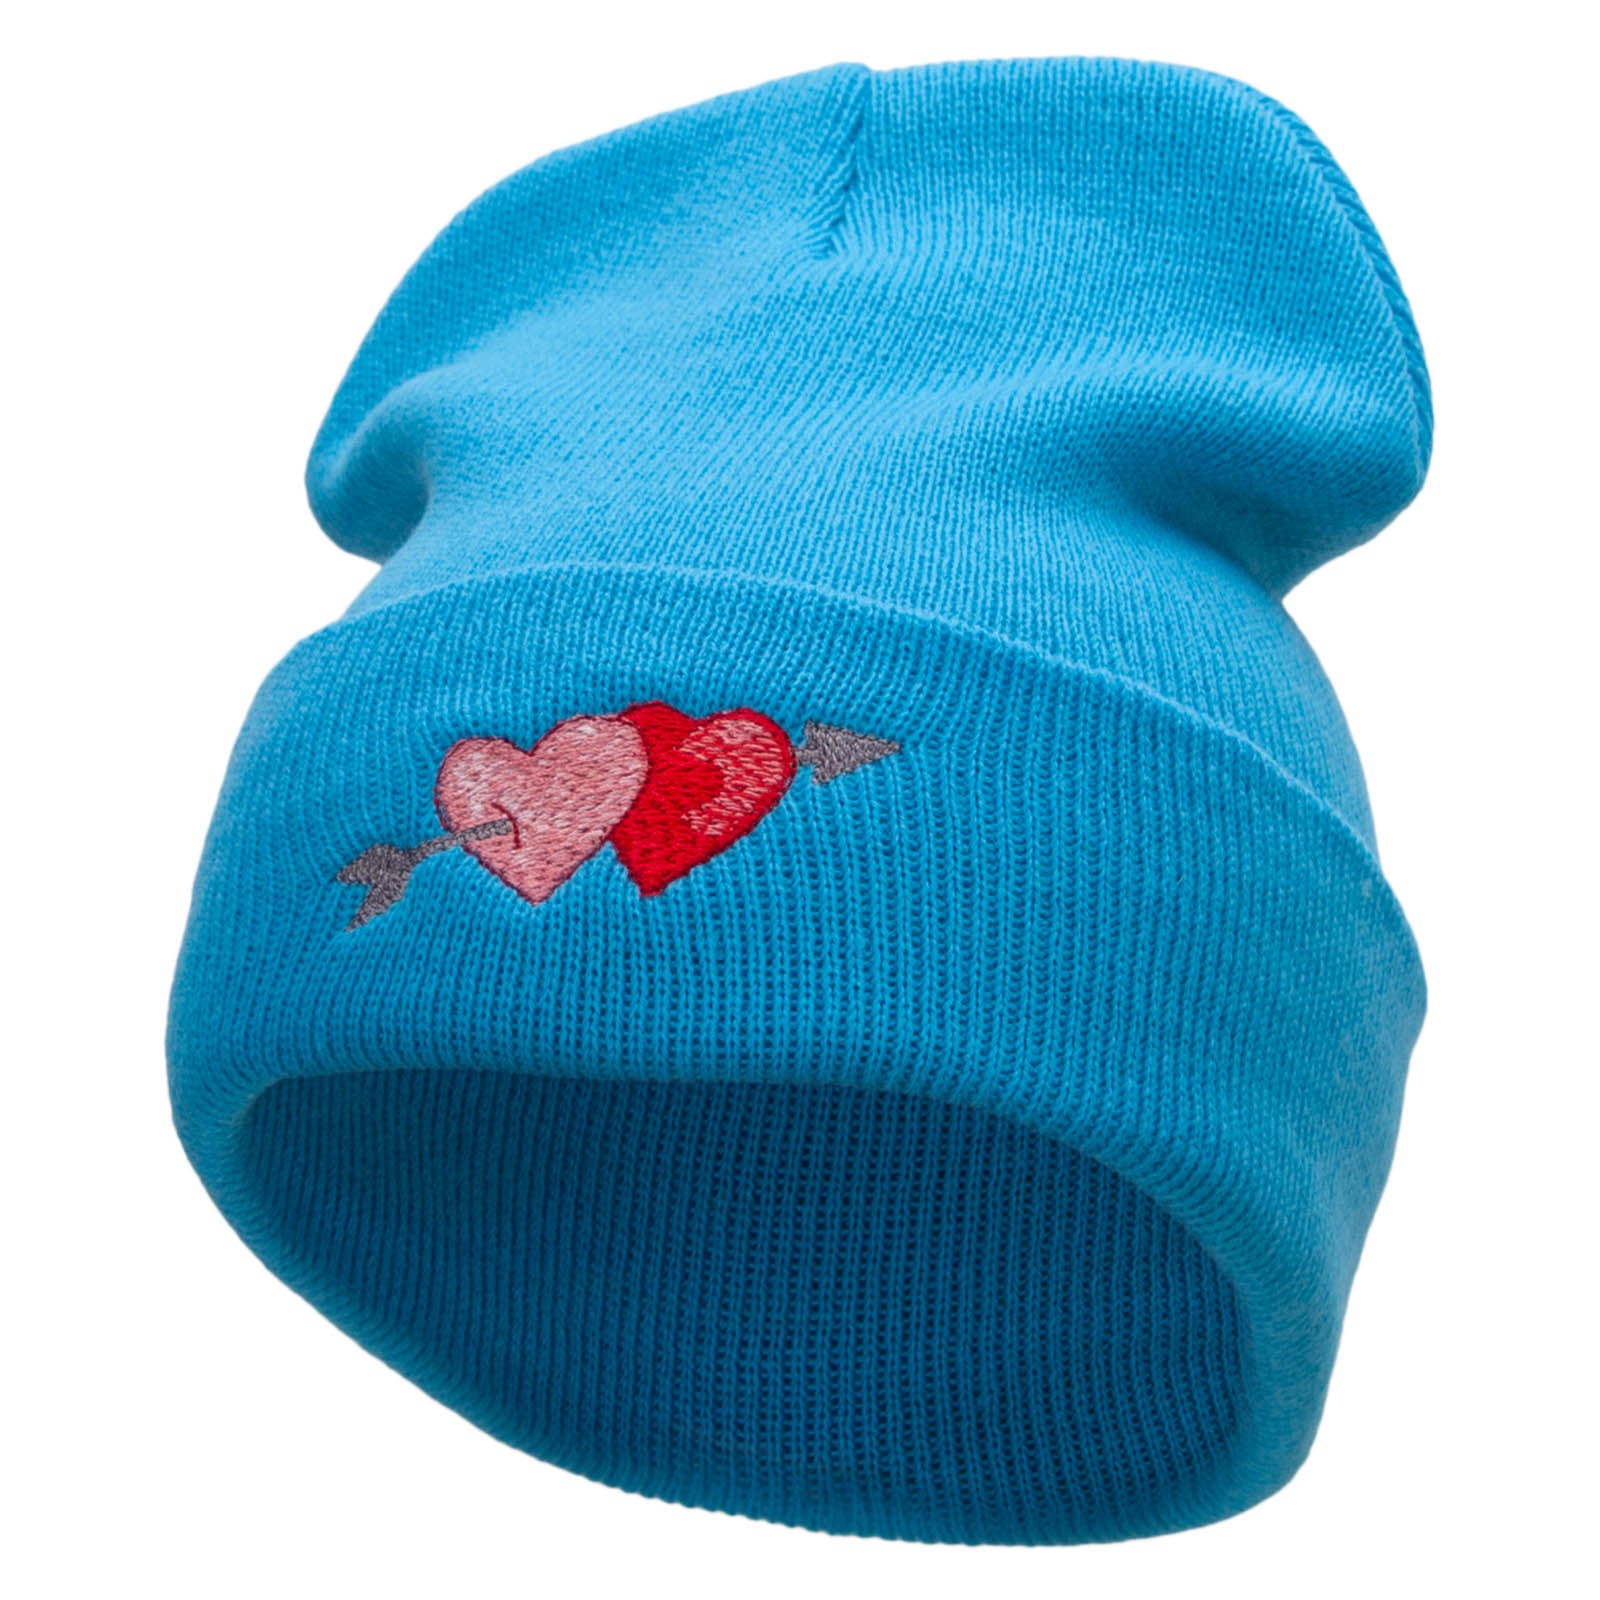 Arrow and Heart Embroidered 12 Inch Solid Long Beanie Made in USA - Aqua OSFM